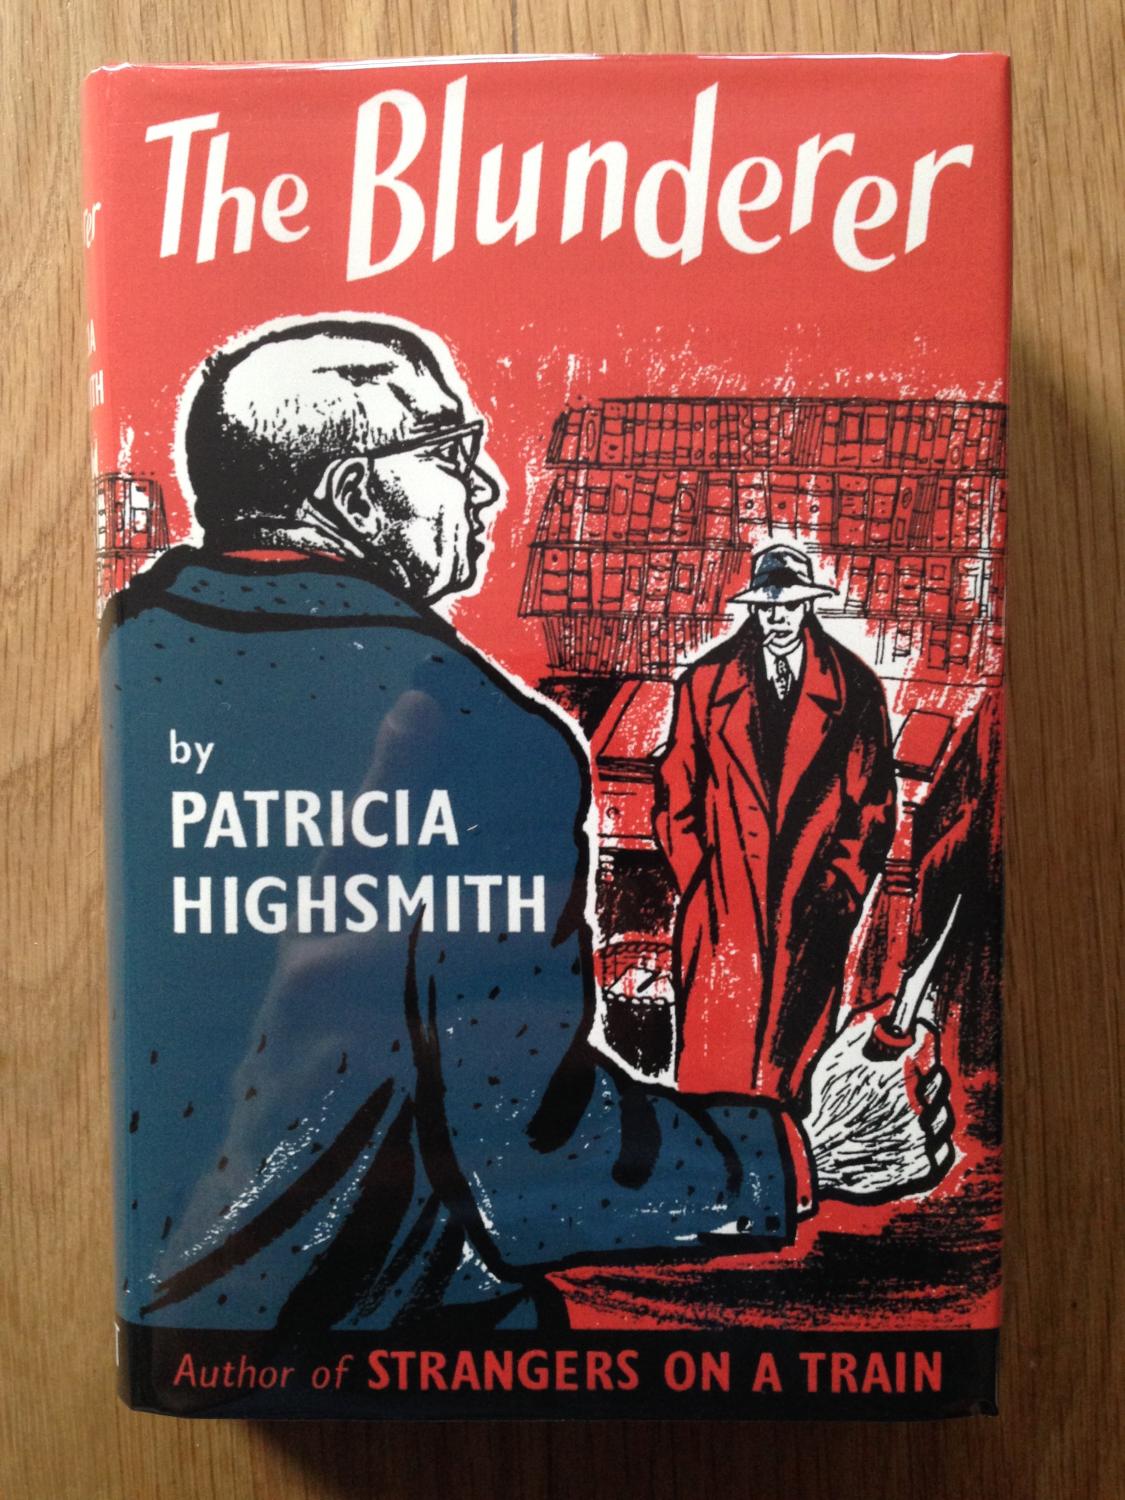 UK cover for The Blunderer.